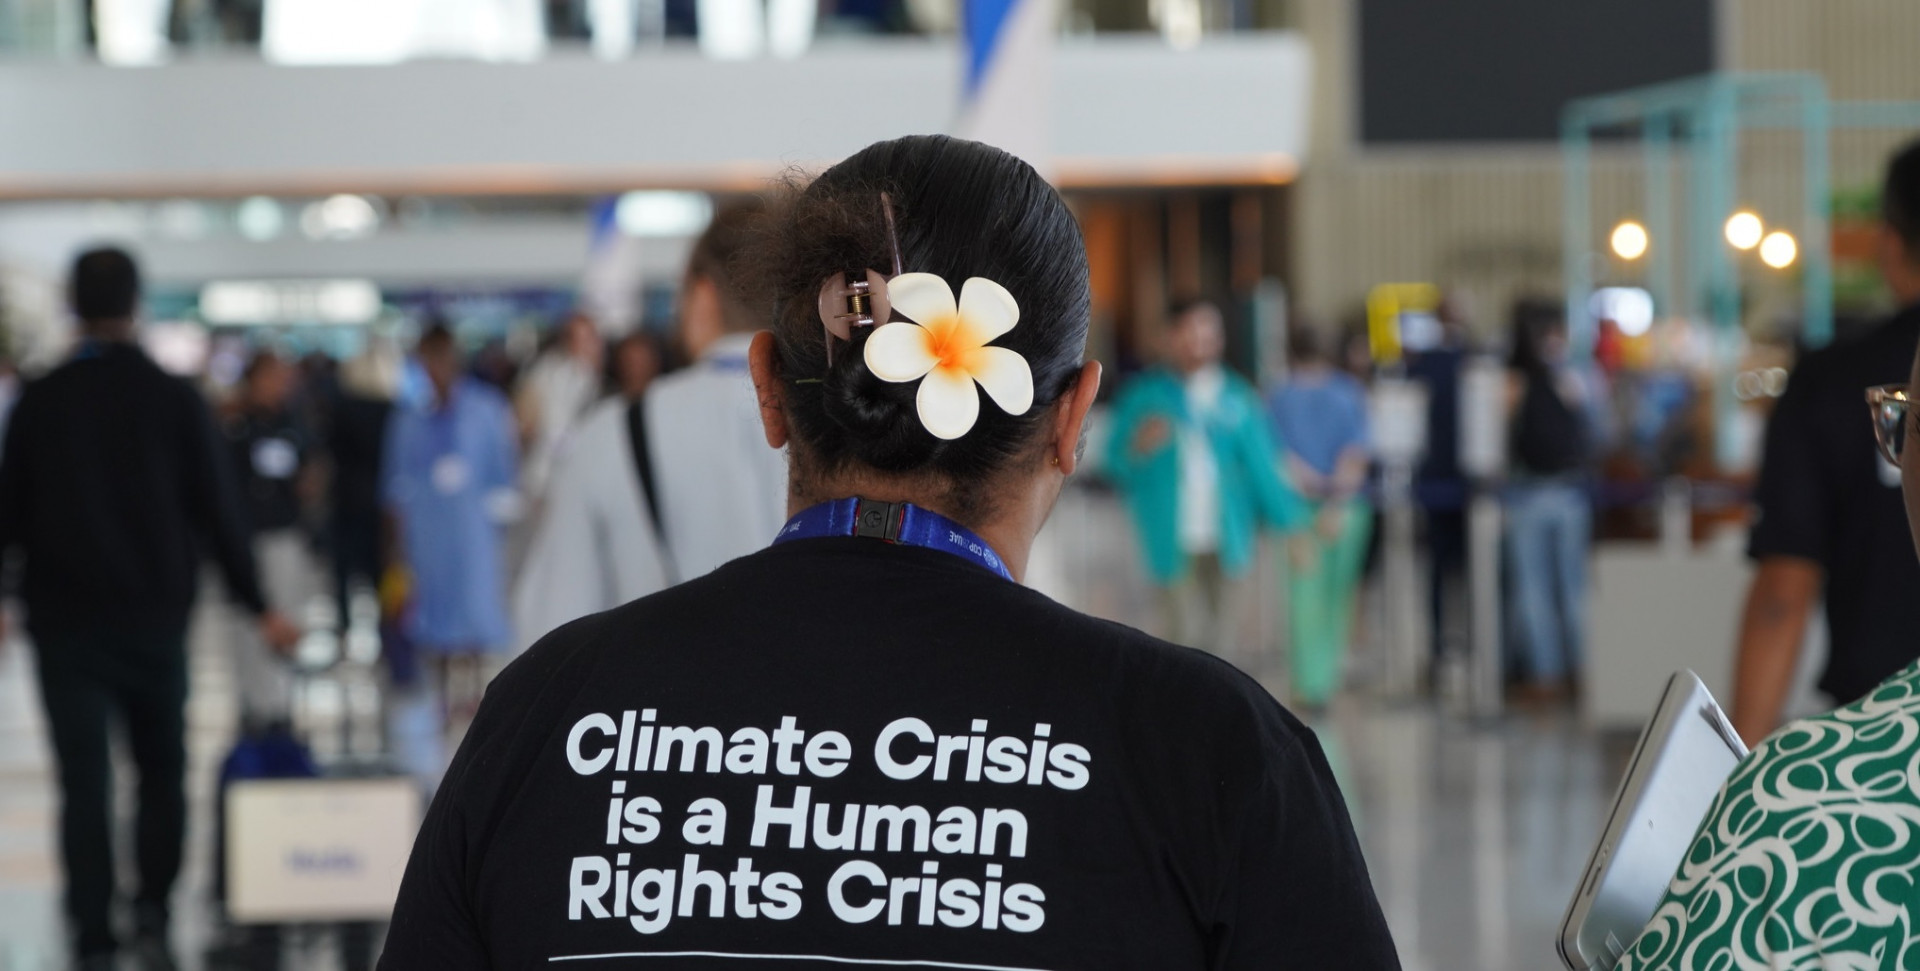 The climate crisis is a human rights crisis.